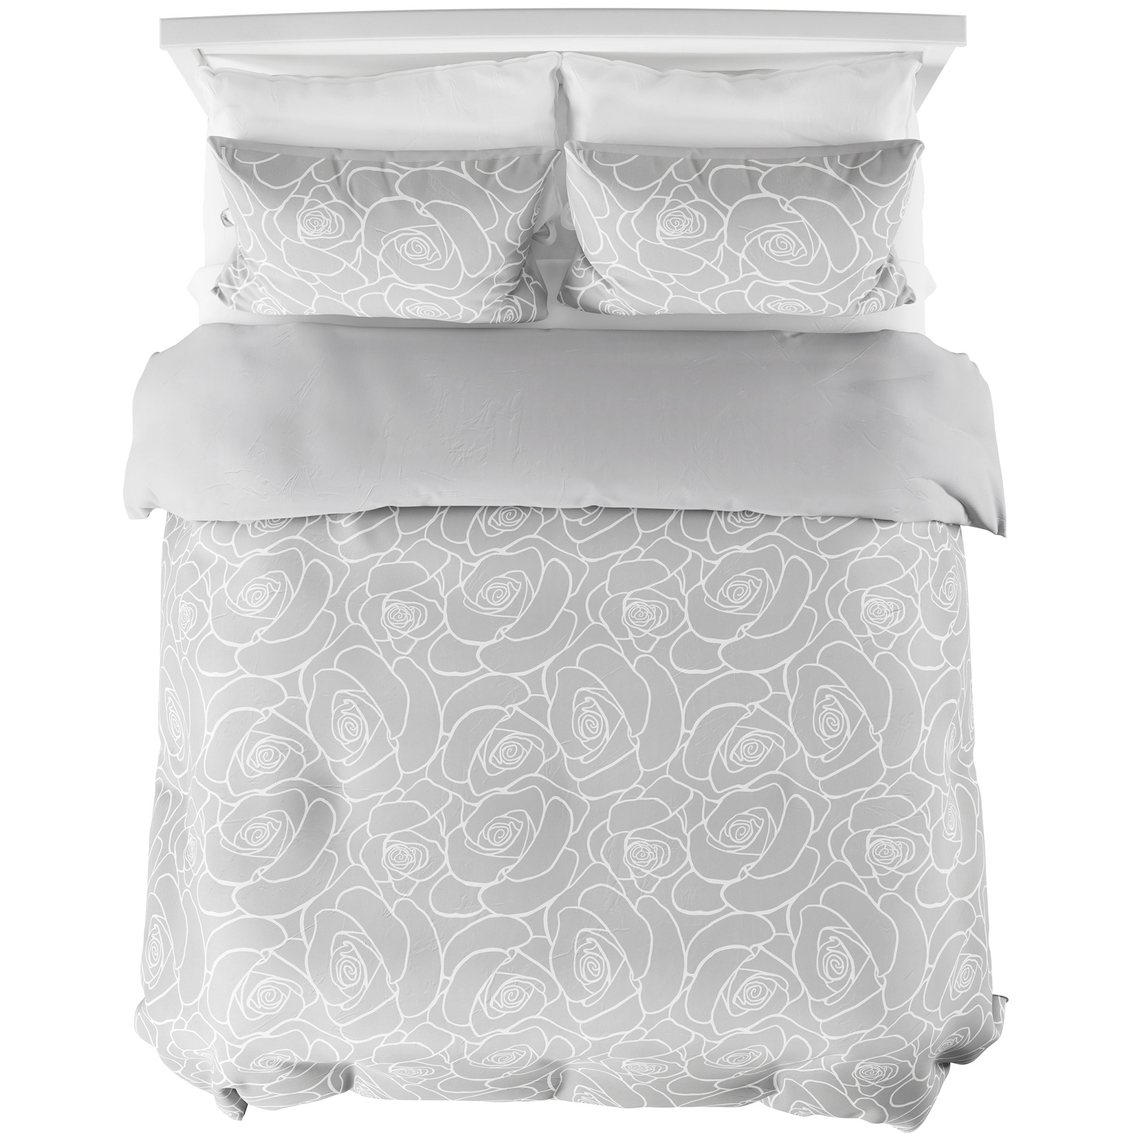 Lavish Home Bed of Roses 3 Pc. Reversible Comforter Set - Image 4 of 7